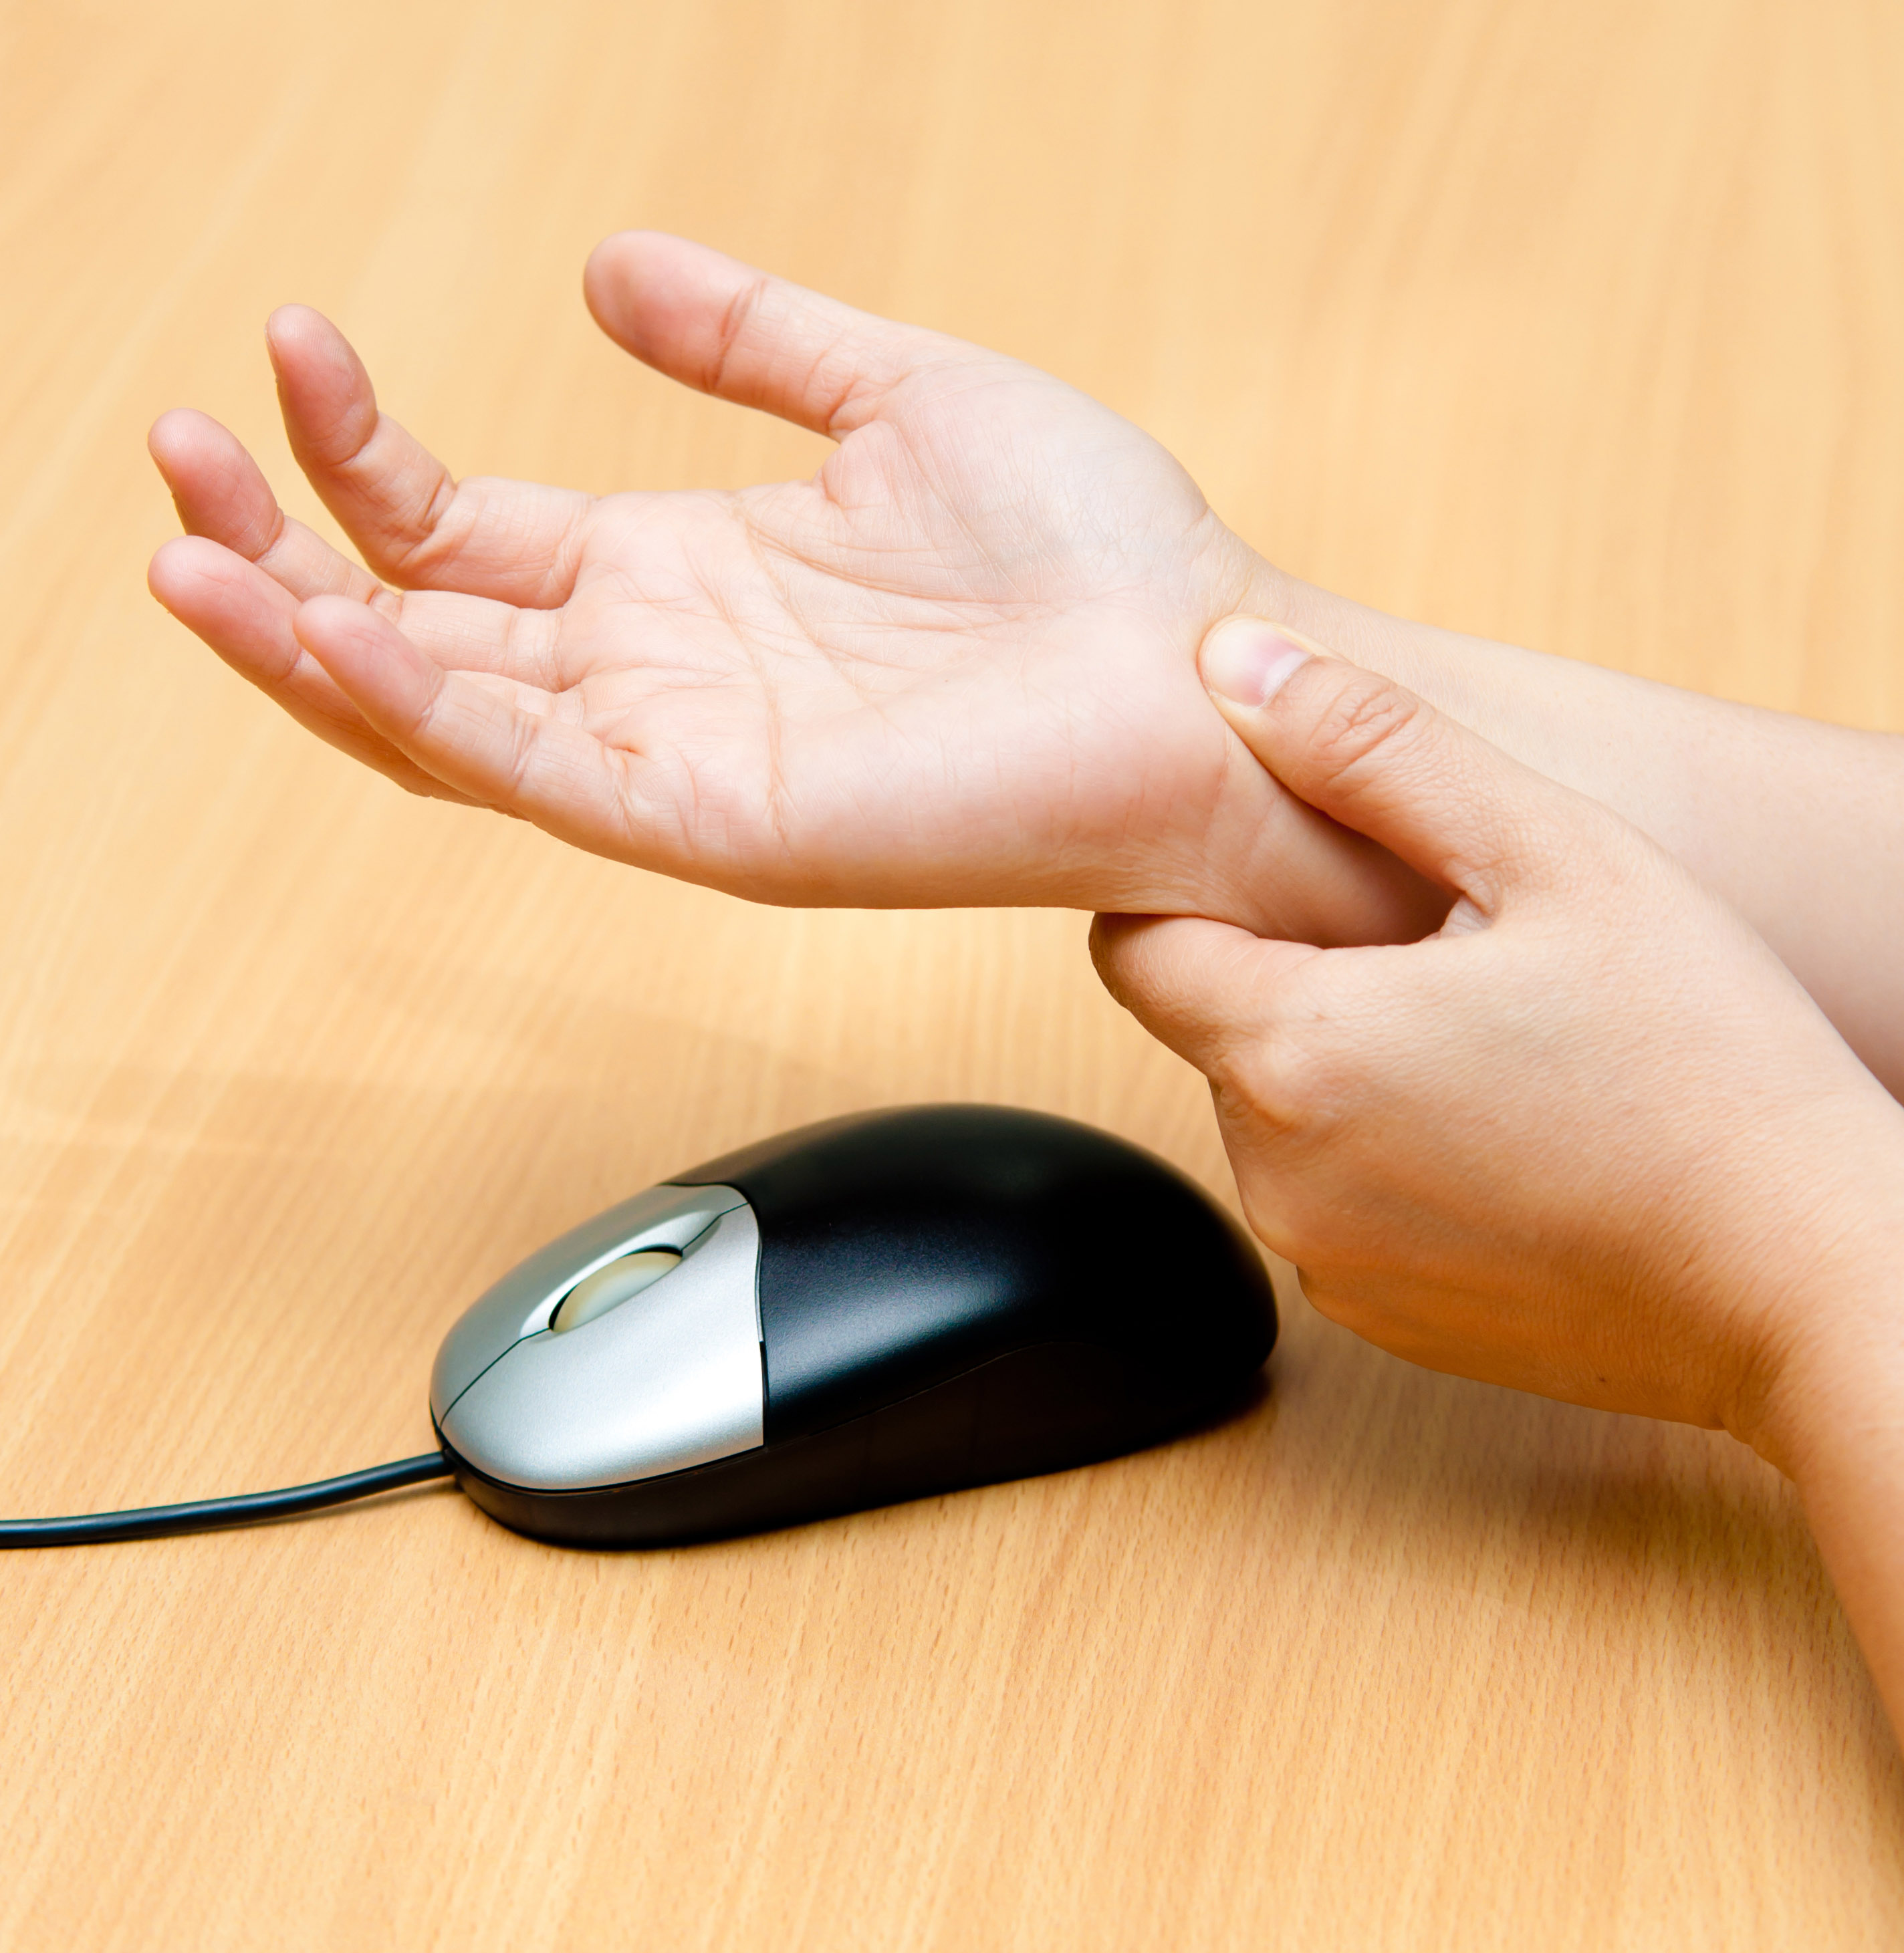 Nondominant hand computer mouse training and the bilateral